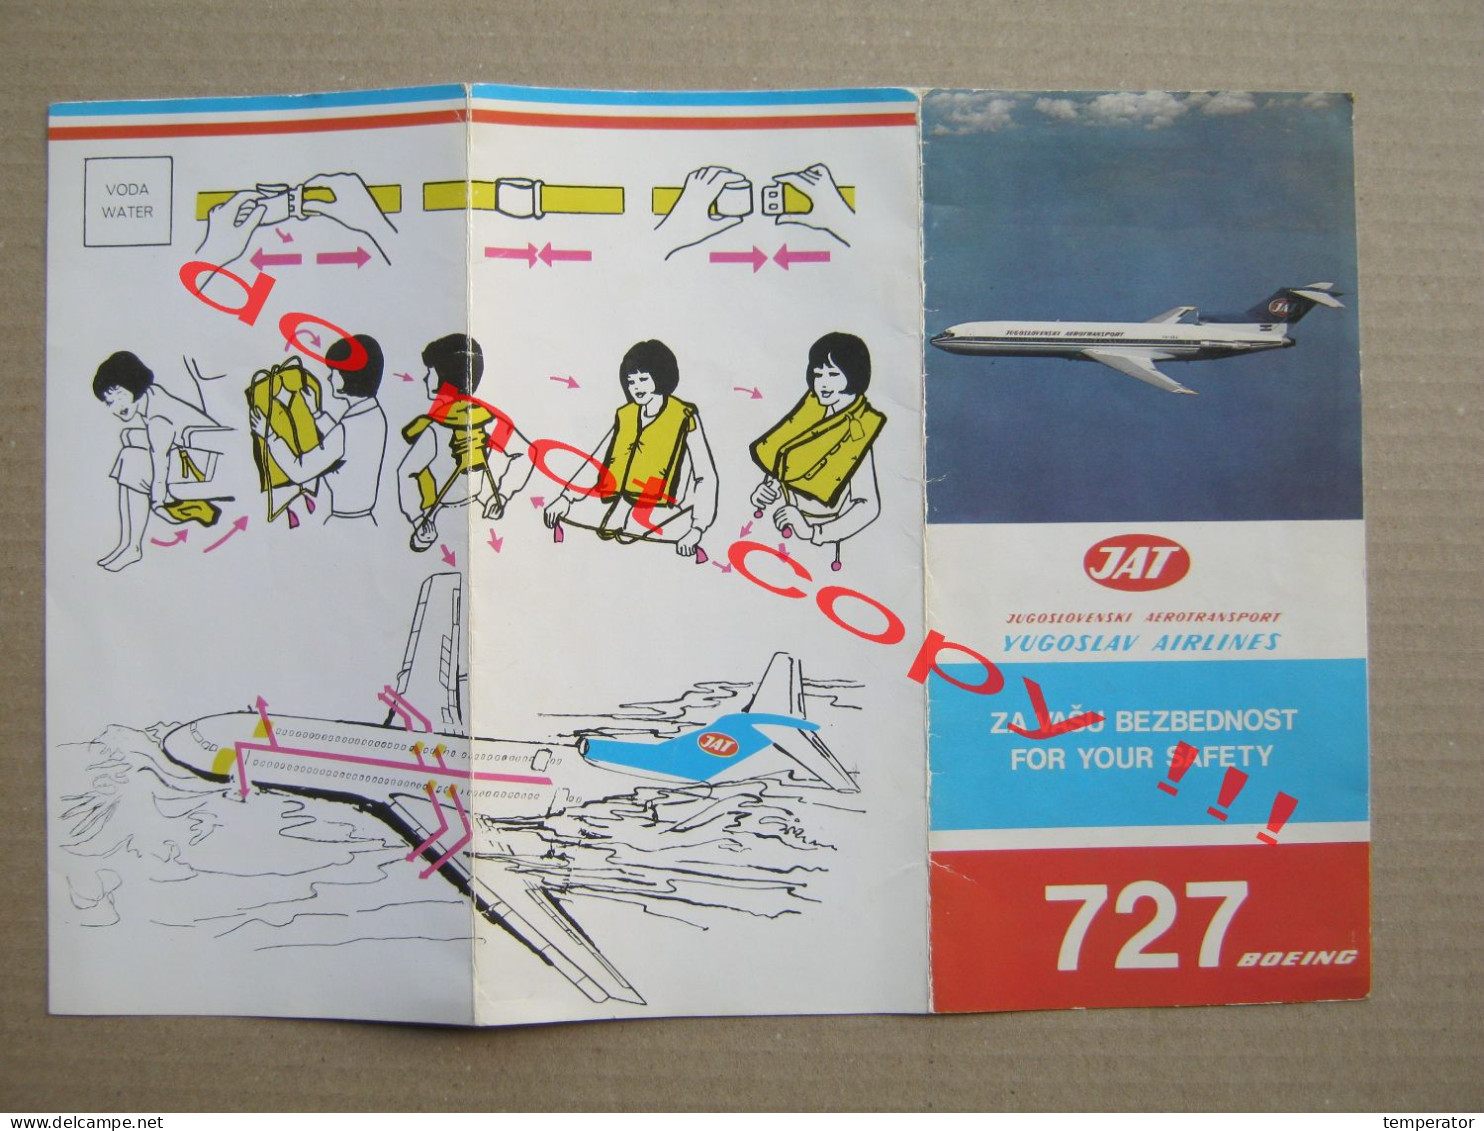 JAT YUGOSLAV AIRLINES - 727 BOEING ( FOR YOUR SAFETY ... ) - Publicidad